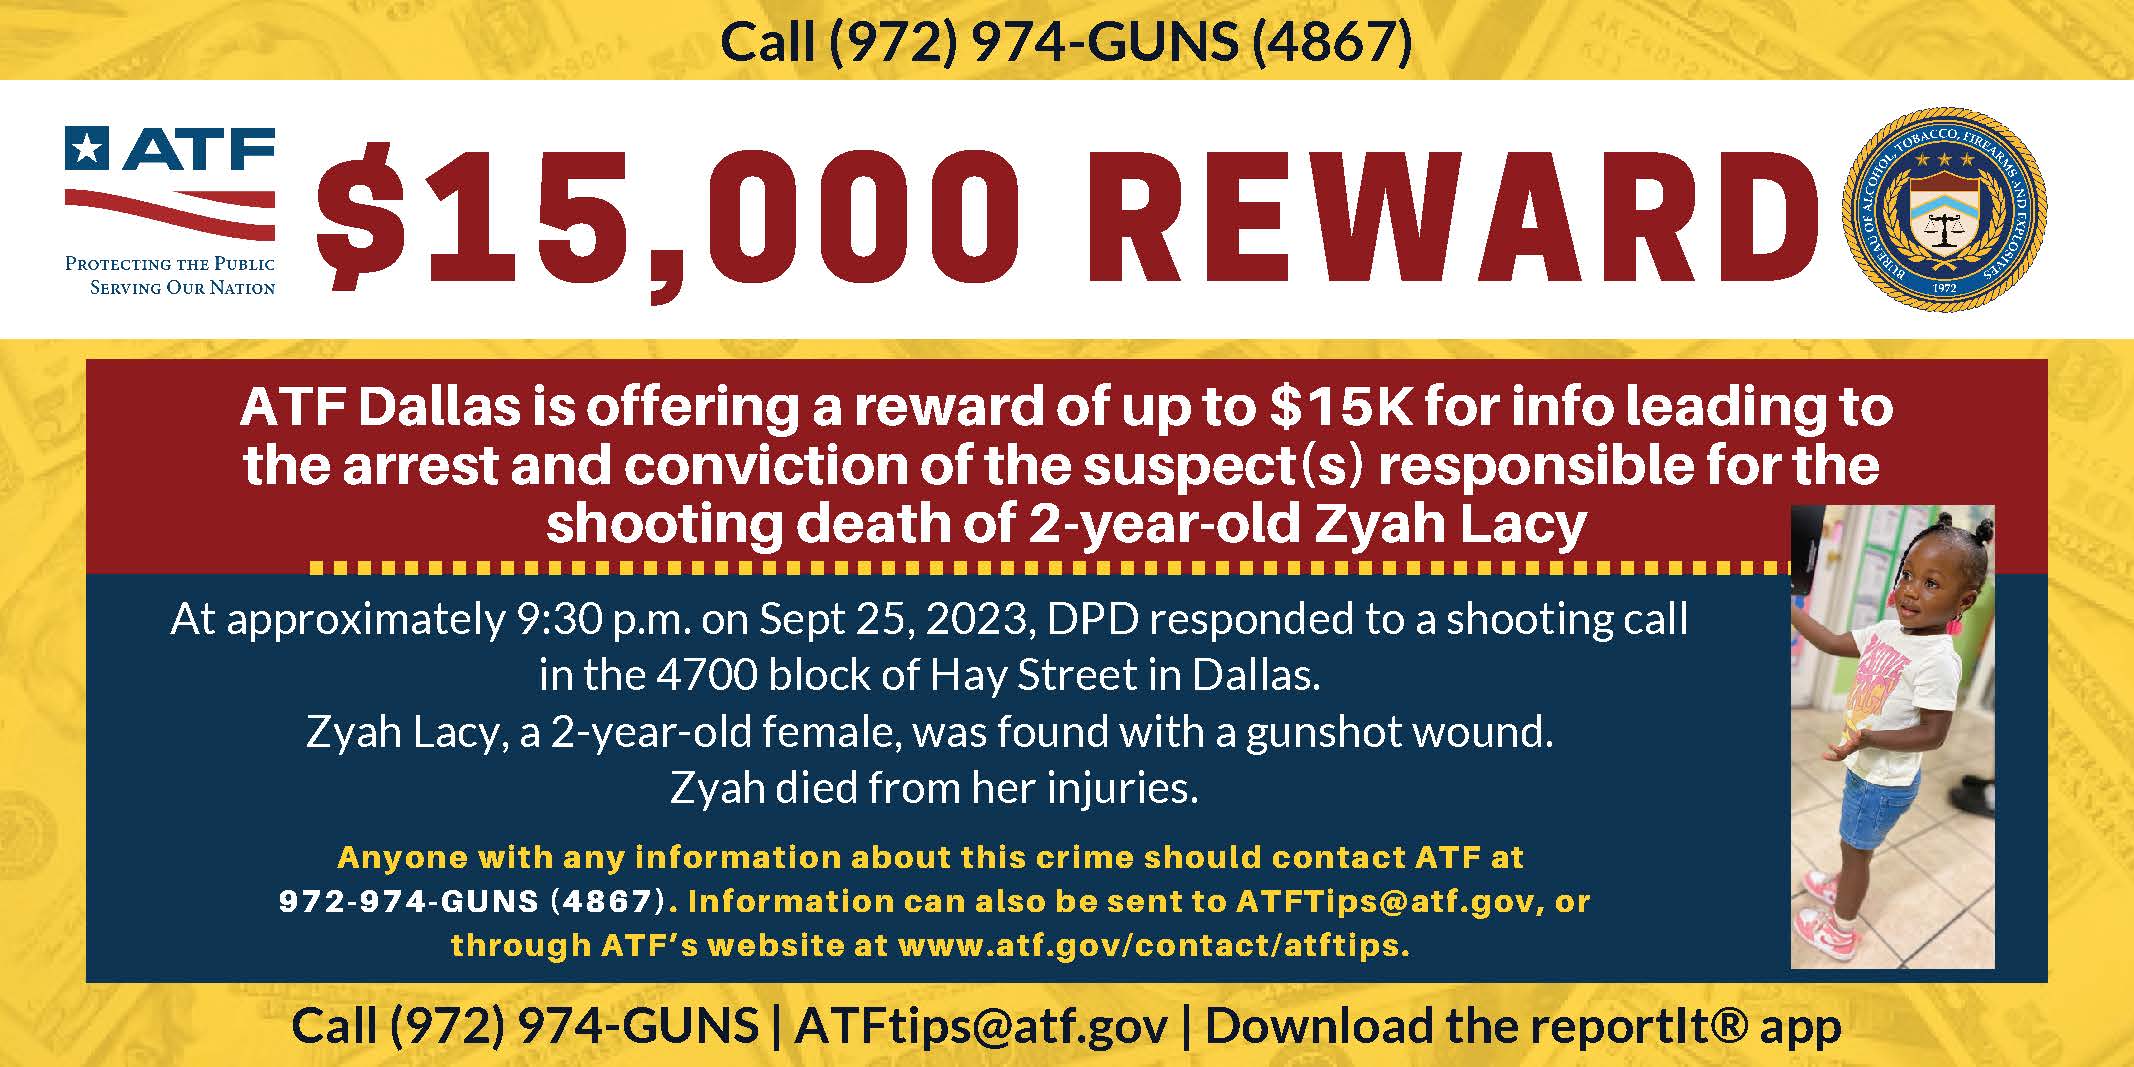 ATF Dallas is offering a reward of up to $15K for info leading to the arrest and conviction of the suspect(s)responsible for the shooting death of 2-year-old Zyah Lacy.